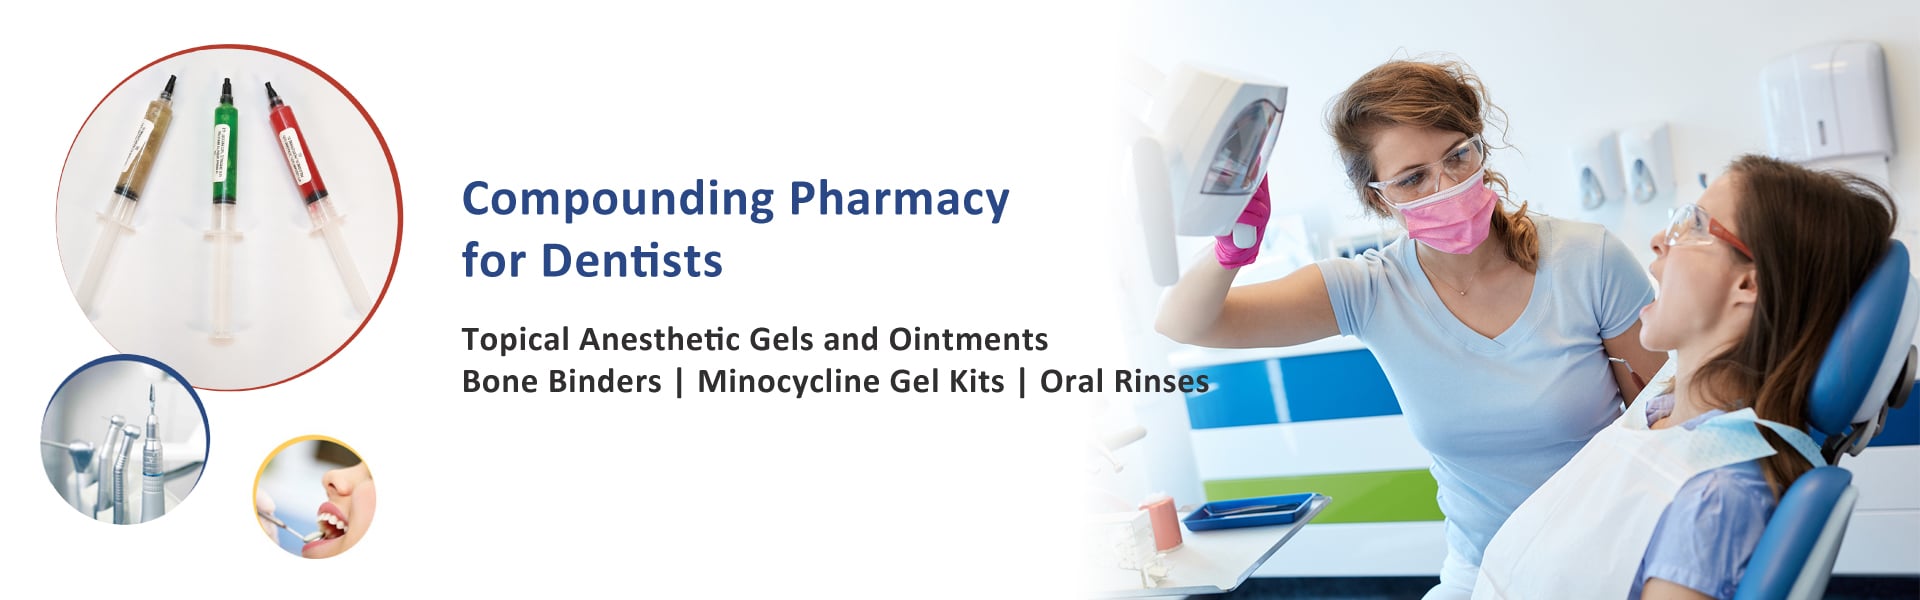 dental compounding includes topical anesthetic gels and medications for gum disease